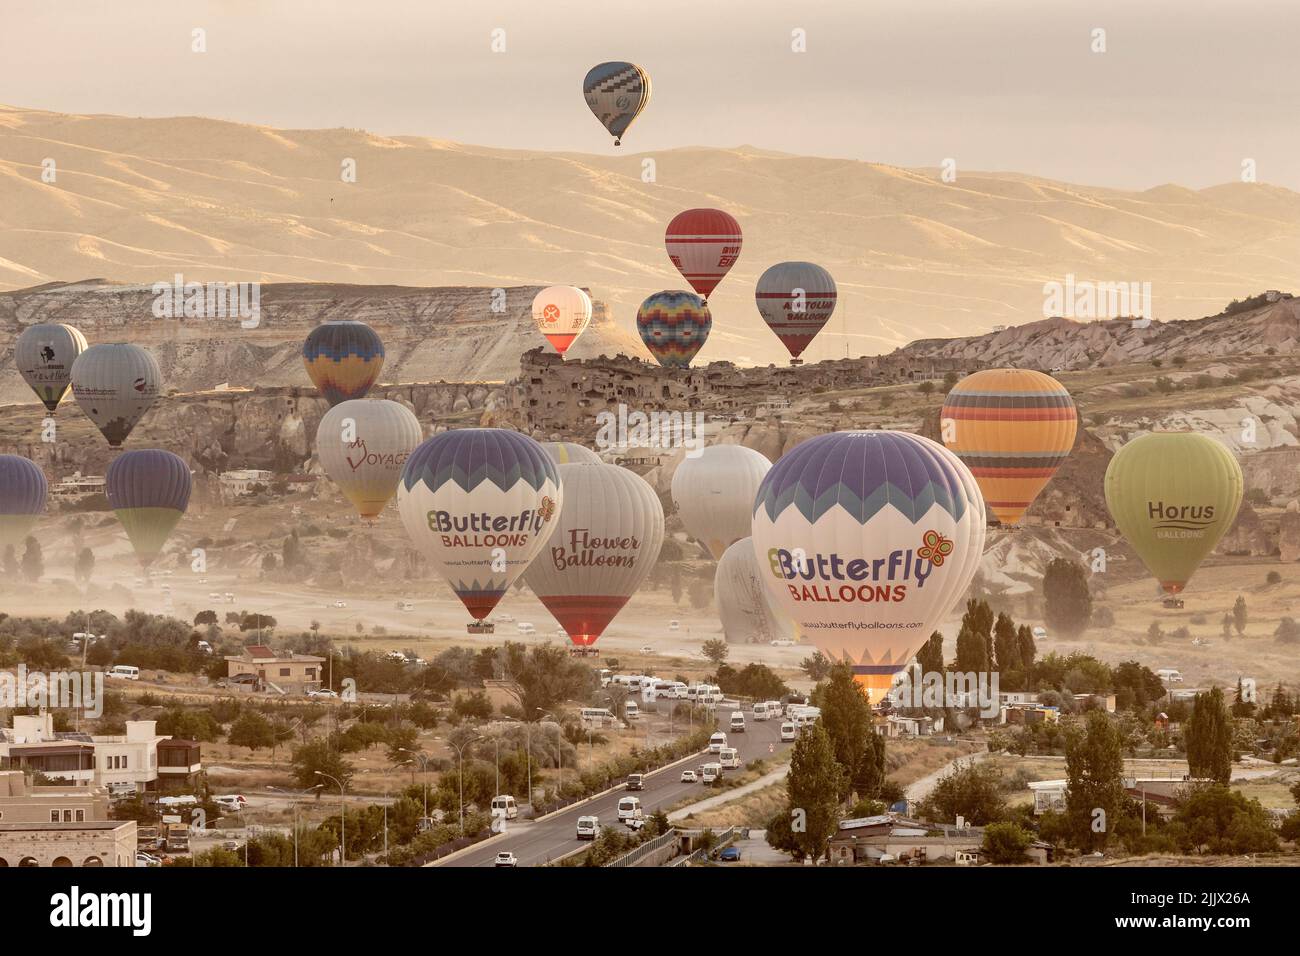 GOREME/TURKEY - June 27, 2022: colorful hot air balloons take flight over the city of goreme at sunrise. Stock Photo